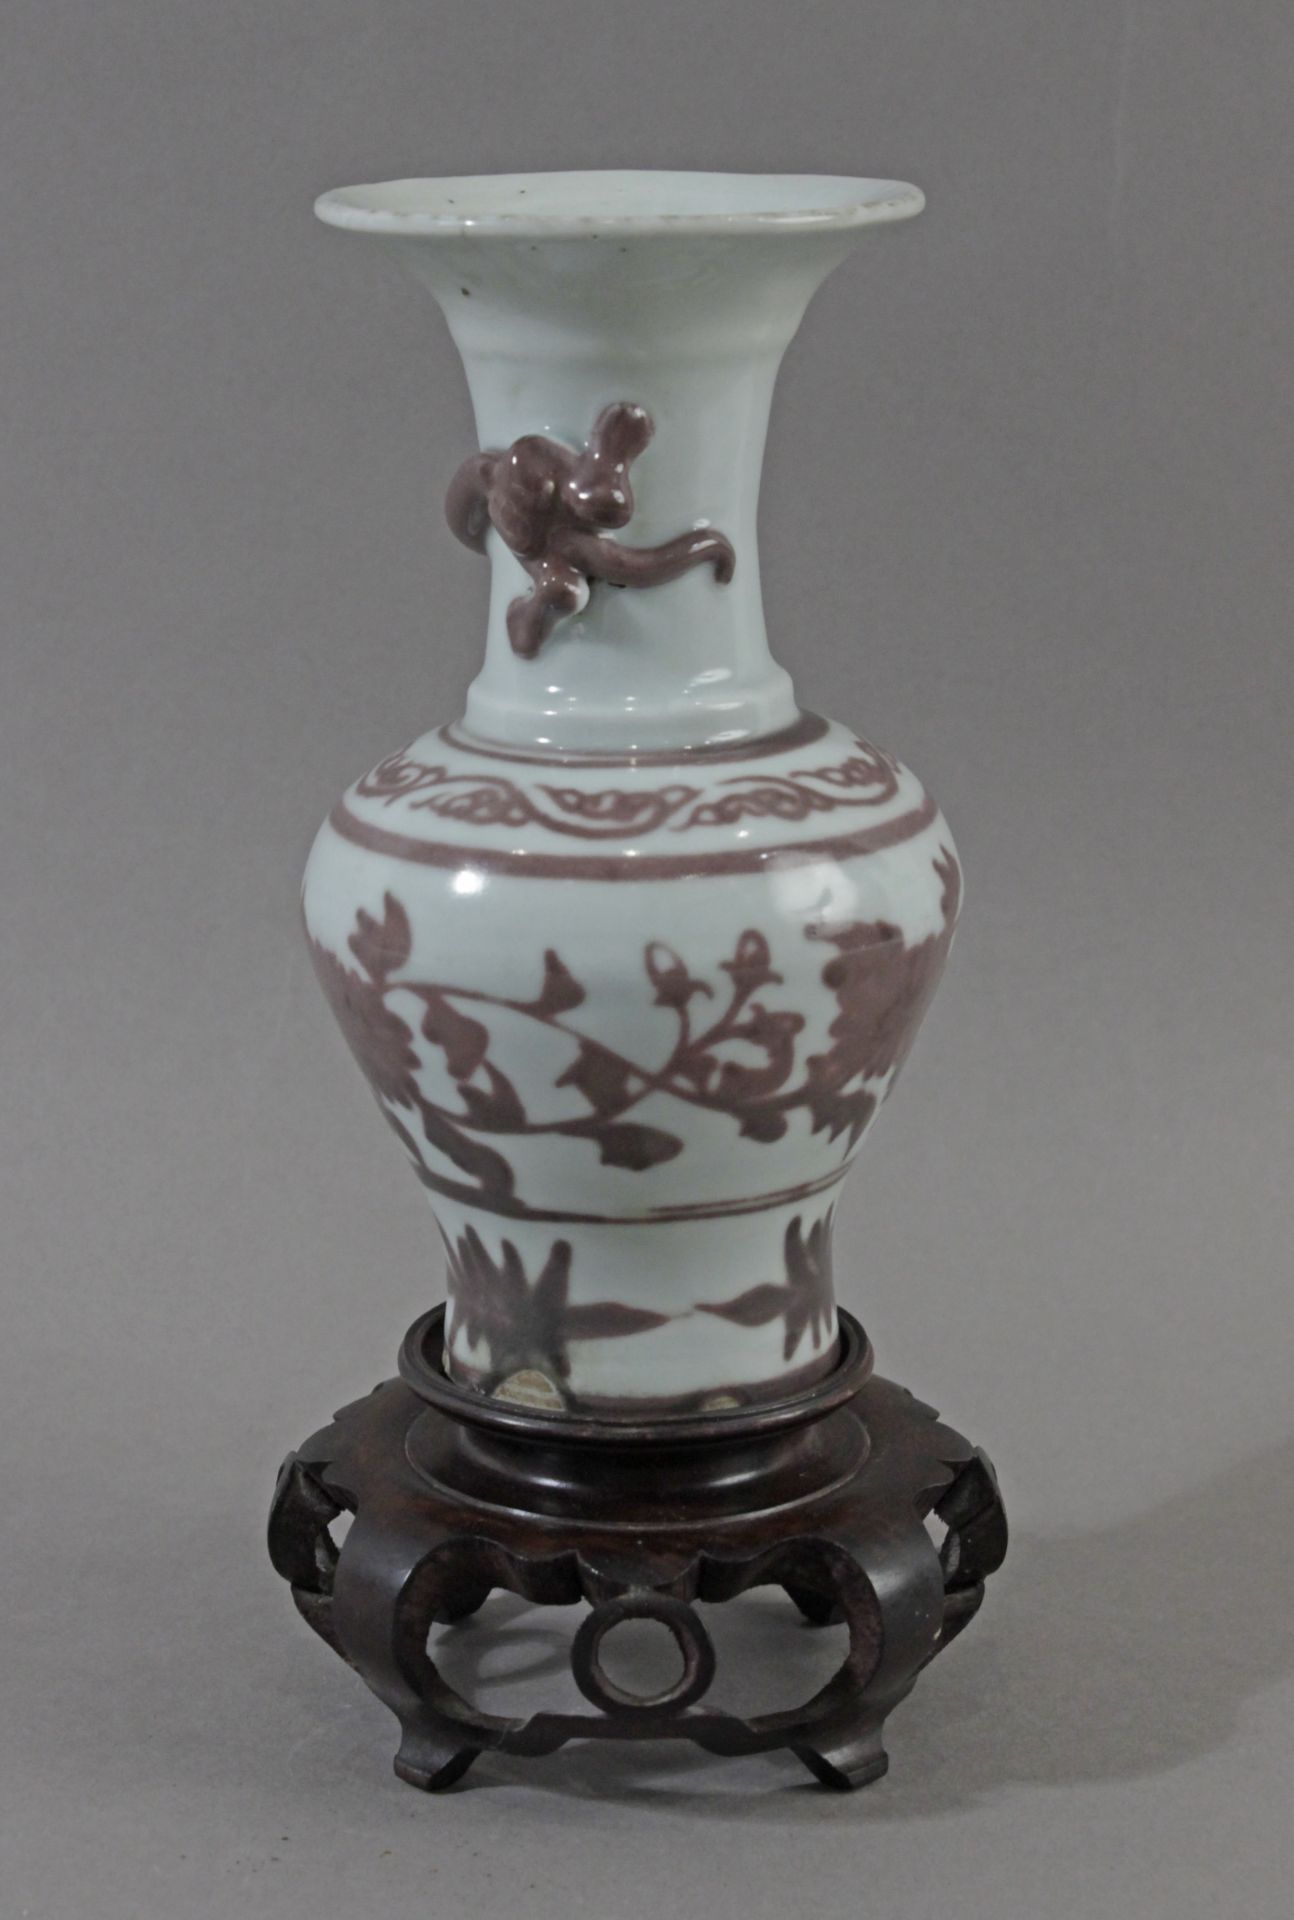 A 20th century Chinese vase from Republic period in celadon porcelain - Image 3 of 7